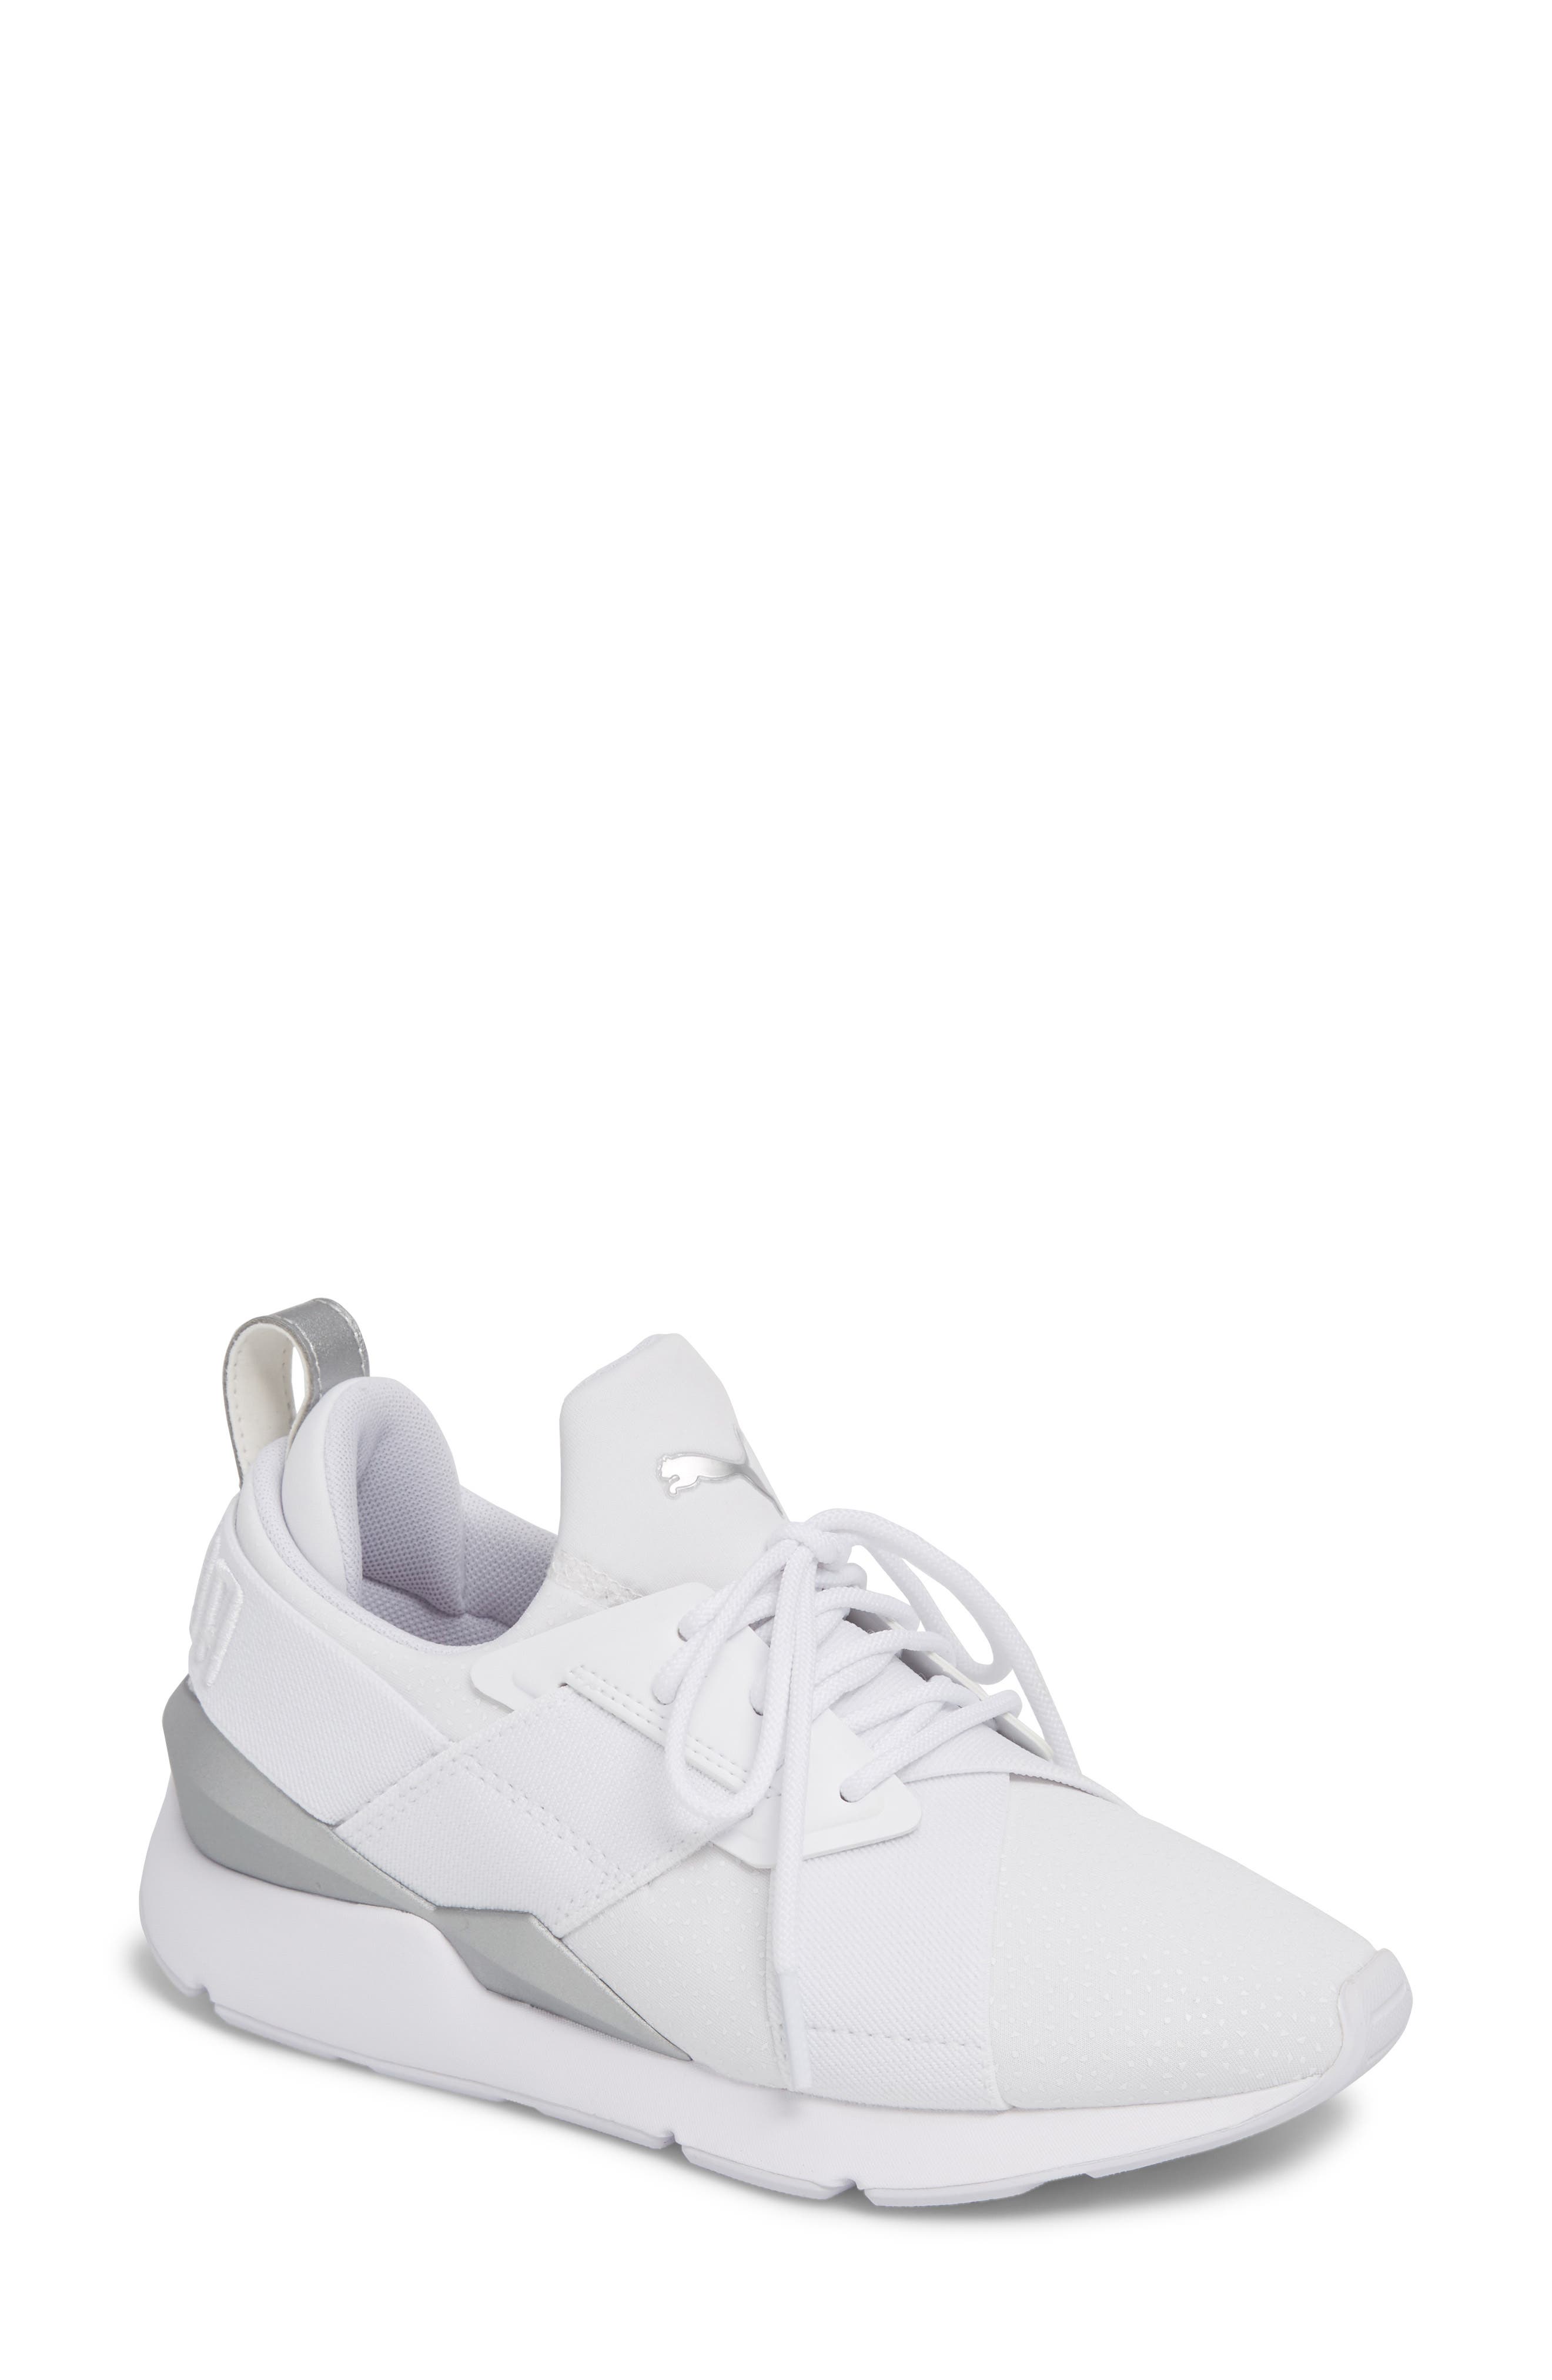 puma muse perf women's sneakers